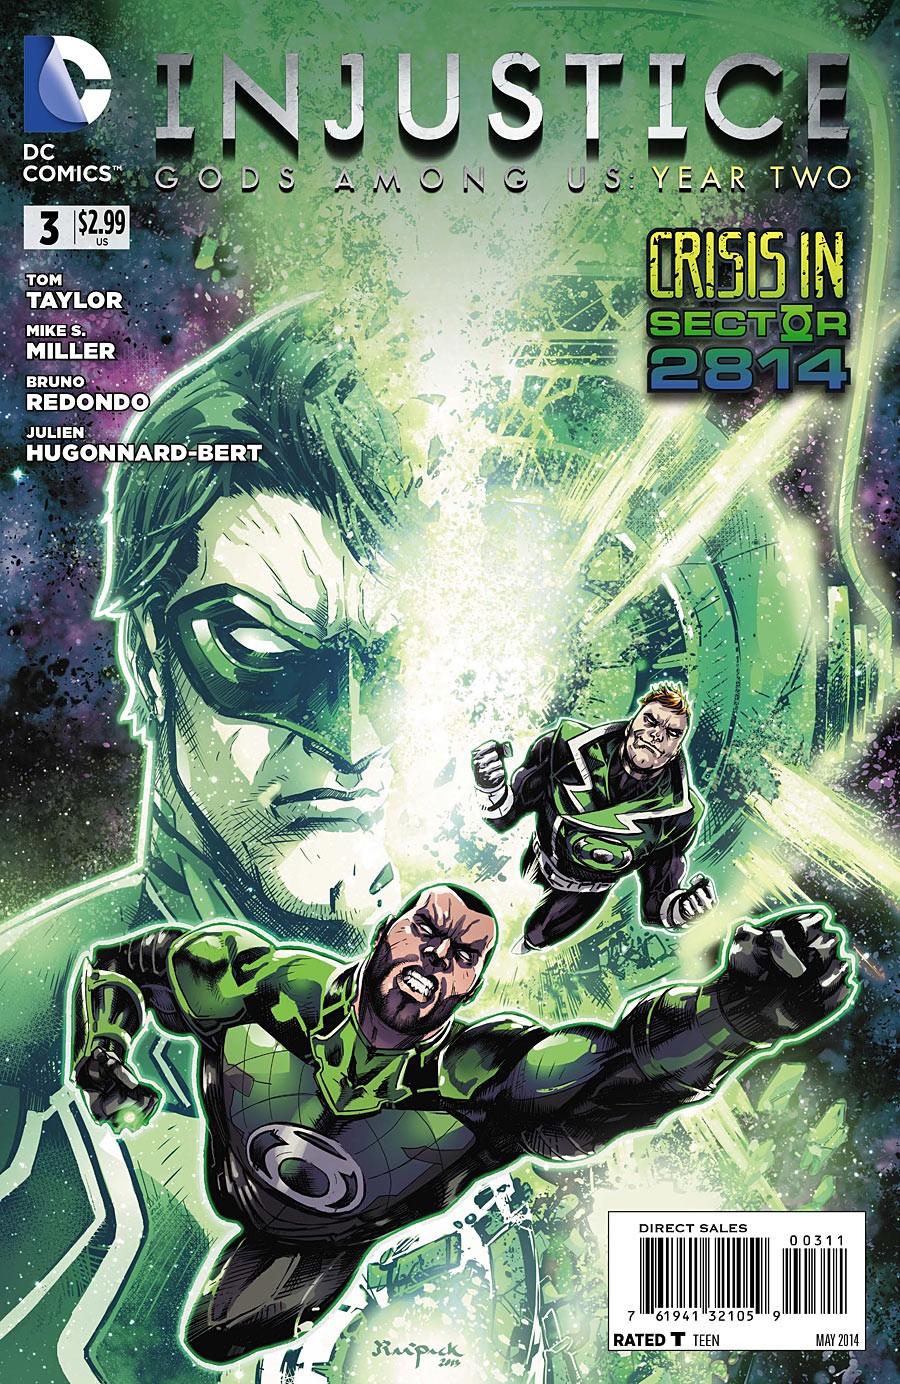 Injustice: Year Two Vol. 1 #3